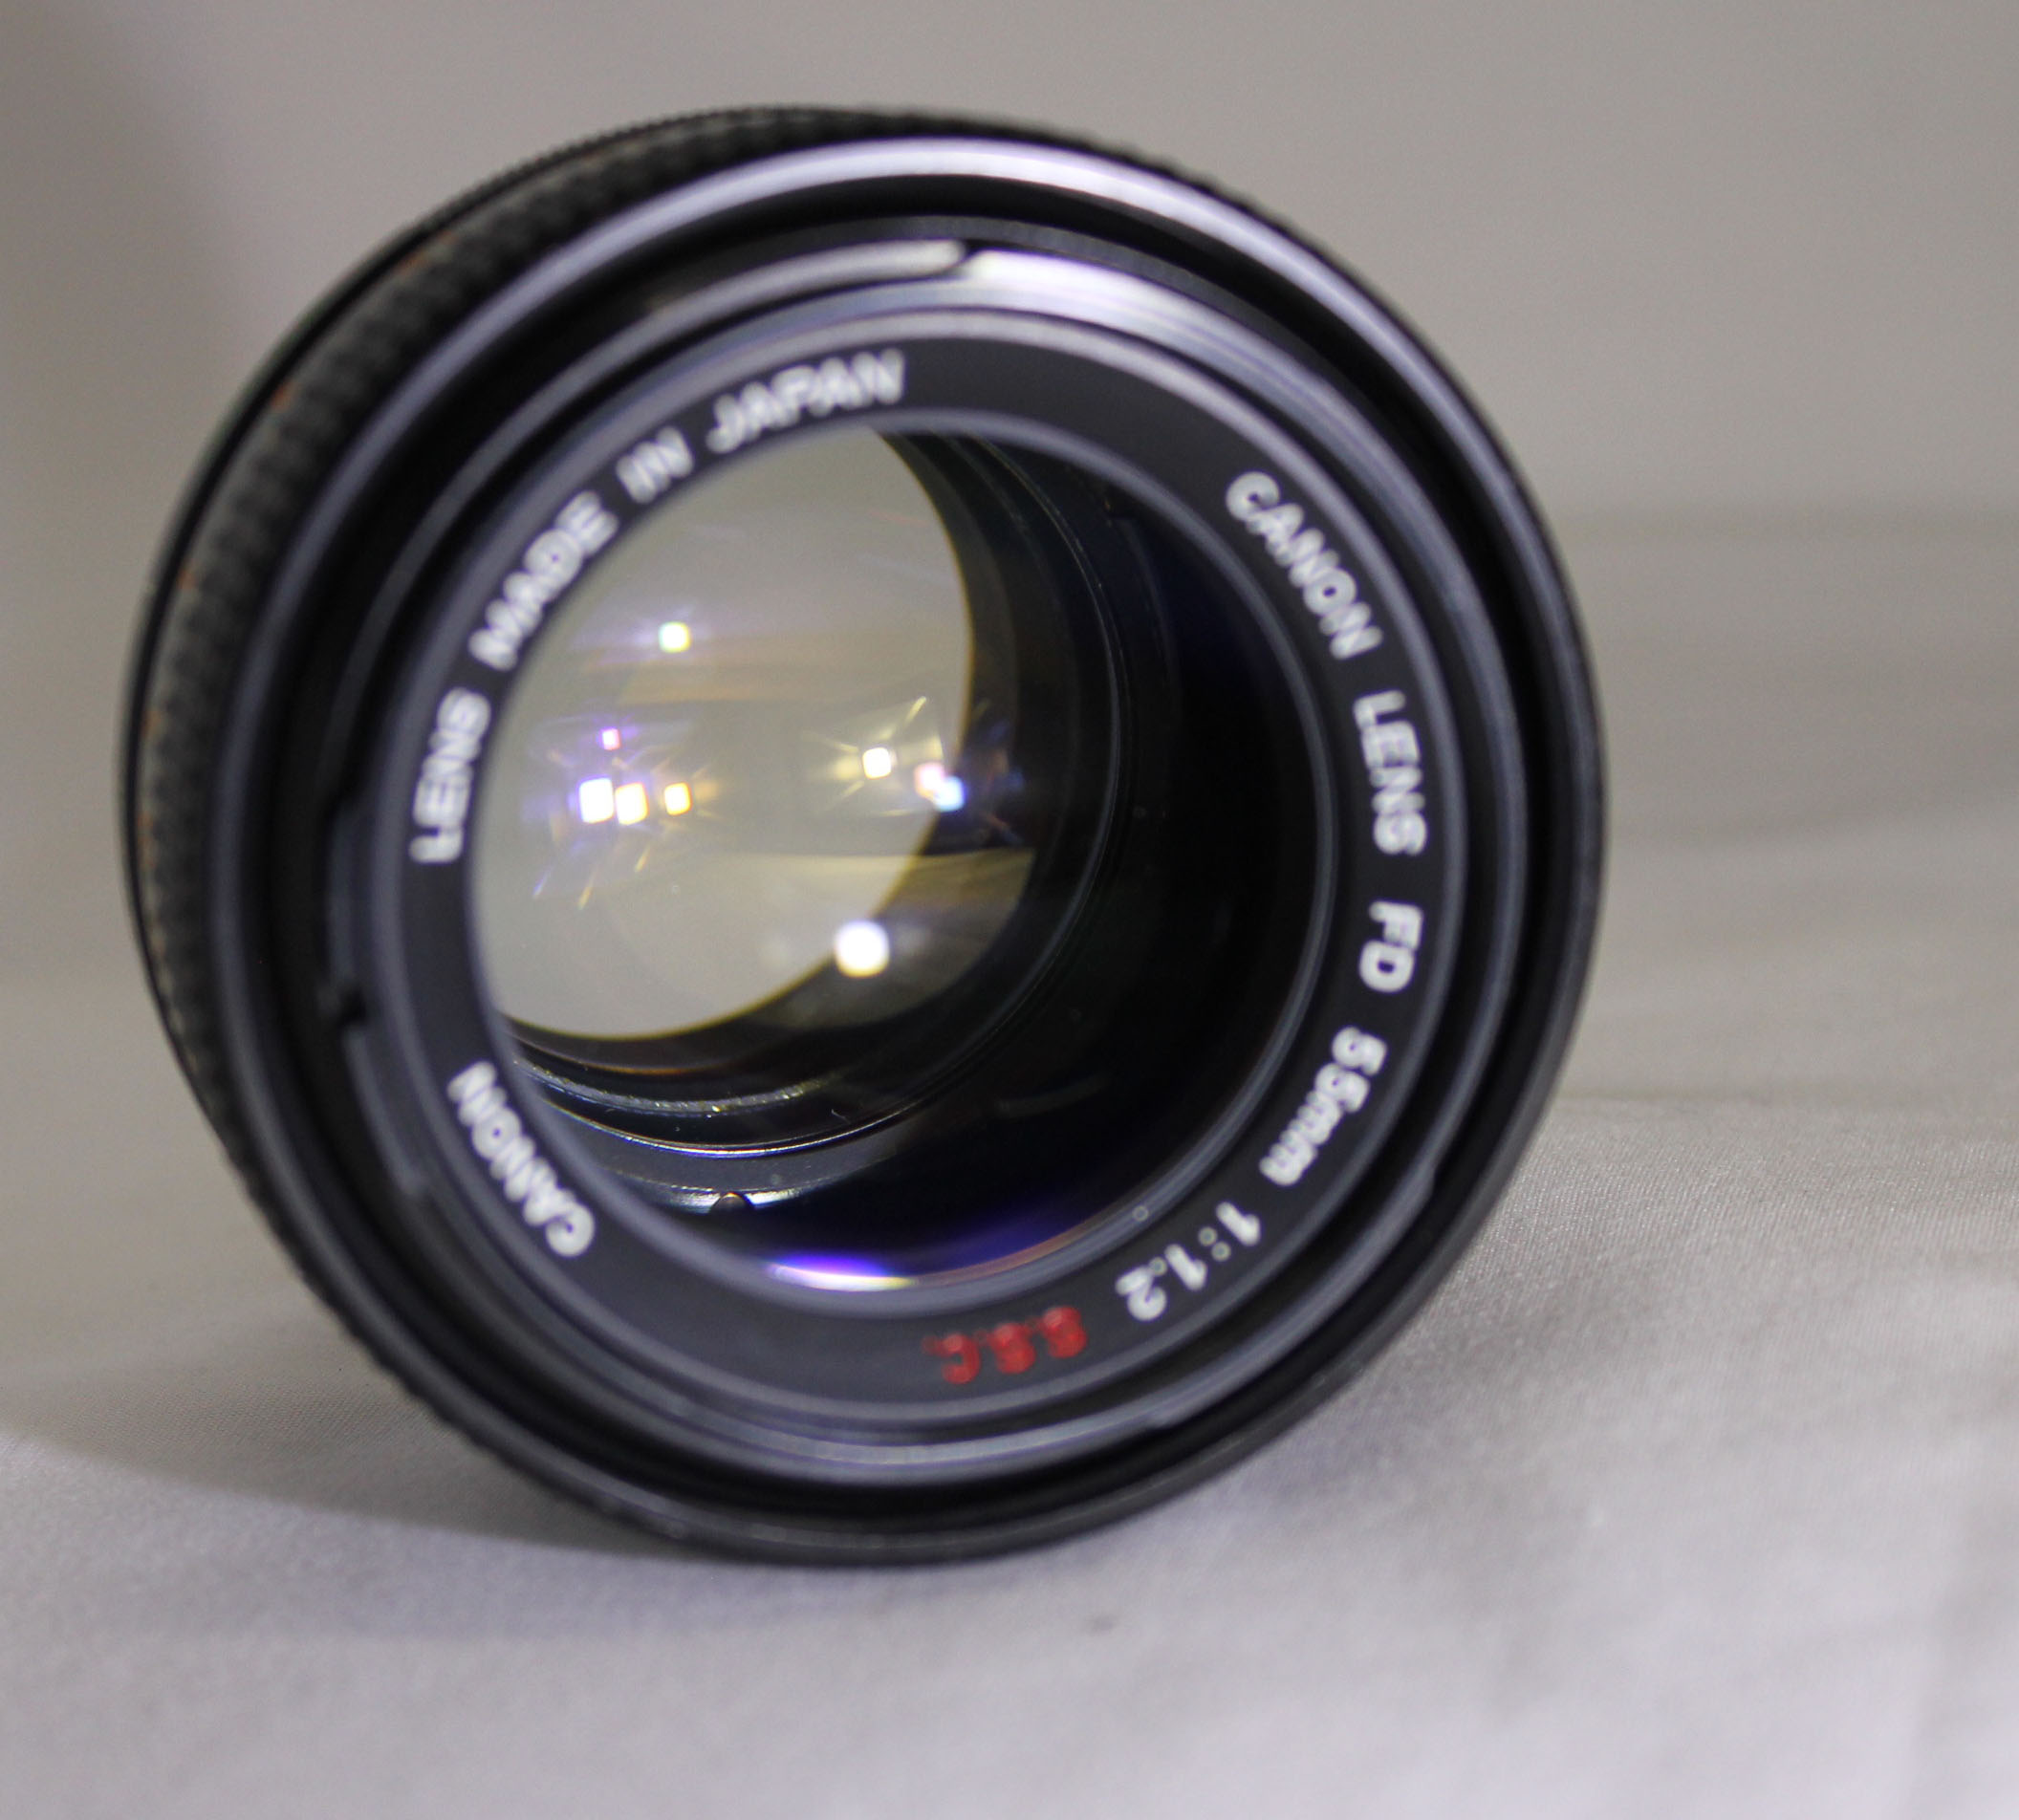  Canon FD 55mm F/1.2 S.S.C. ssc MF Standard Prime Lens from Japan Photo 7